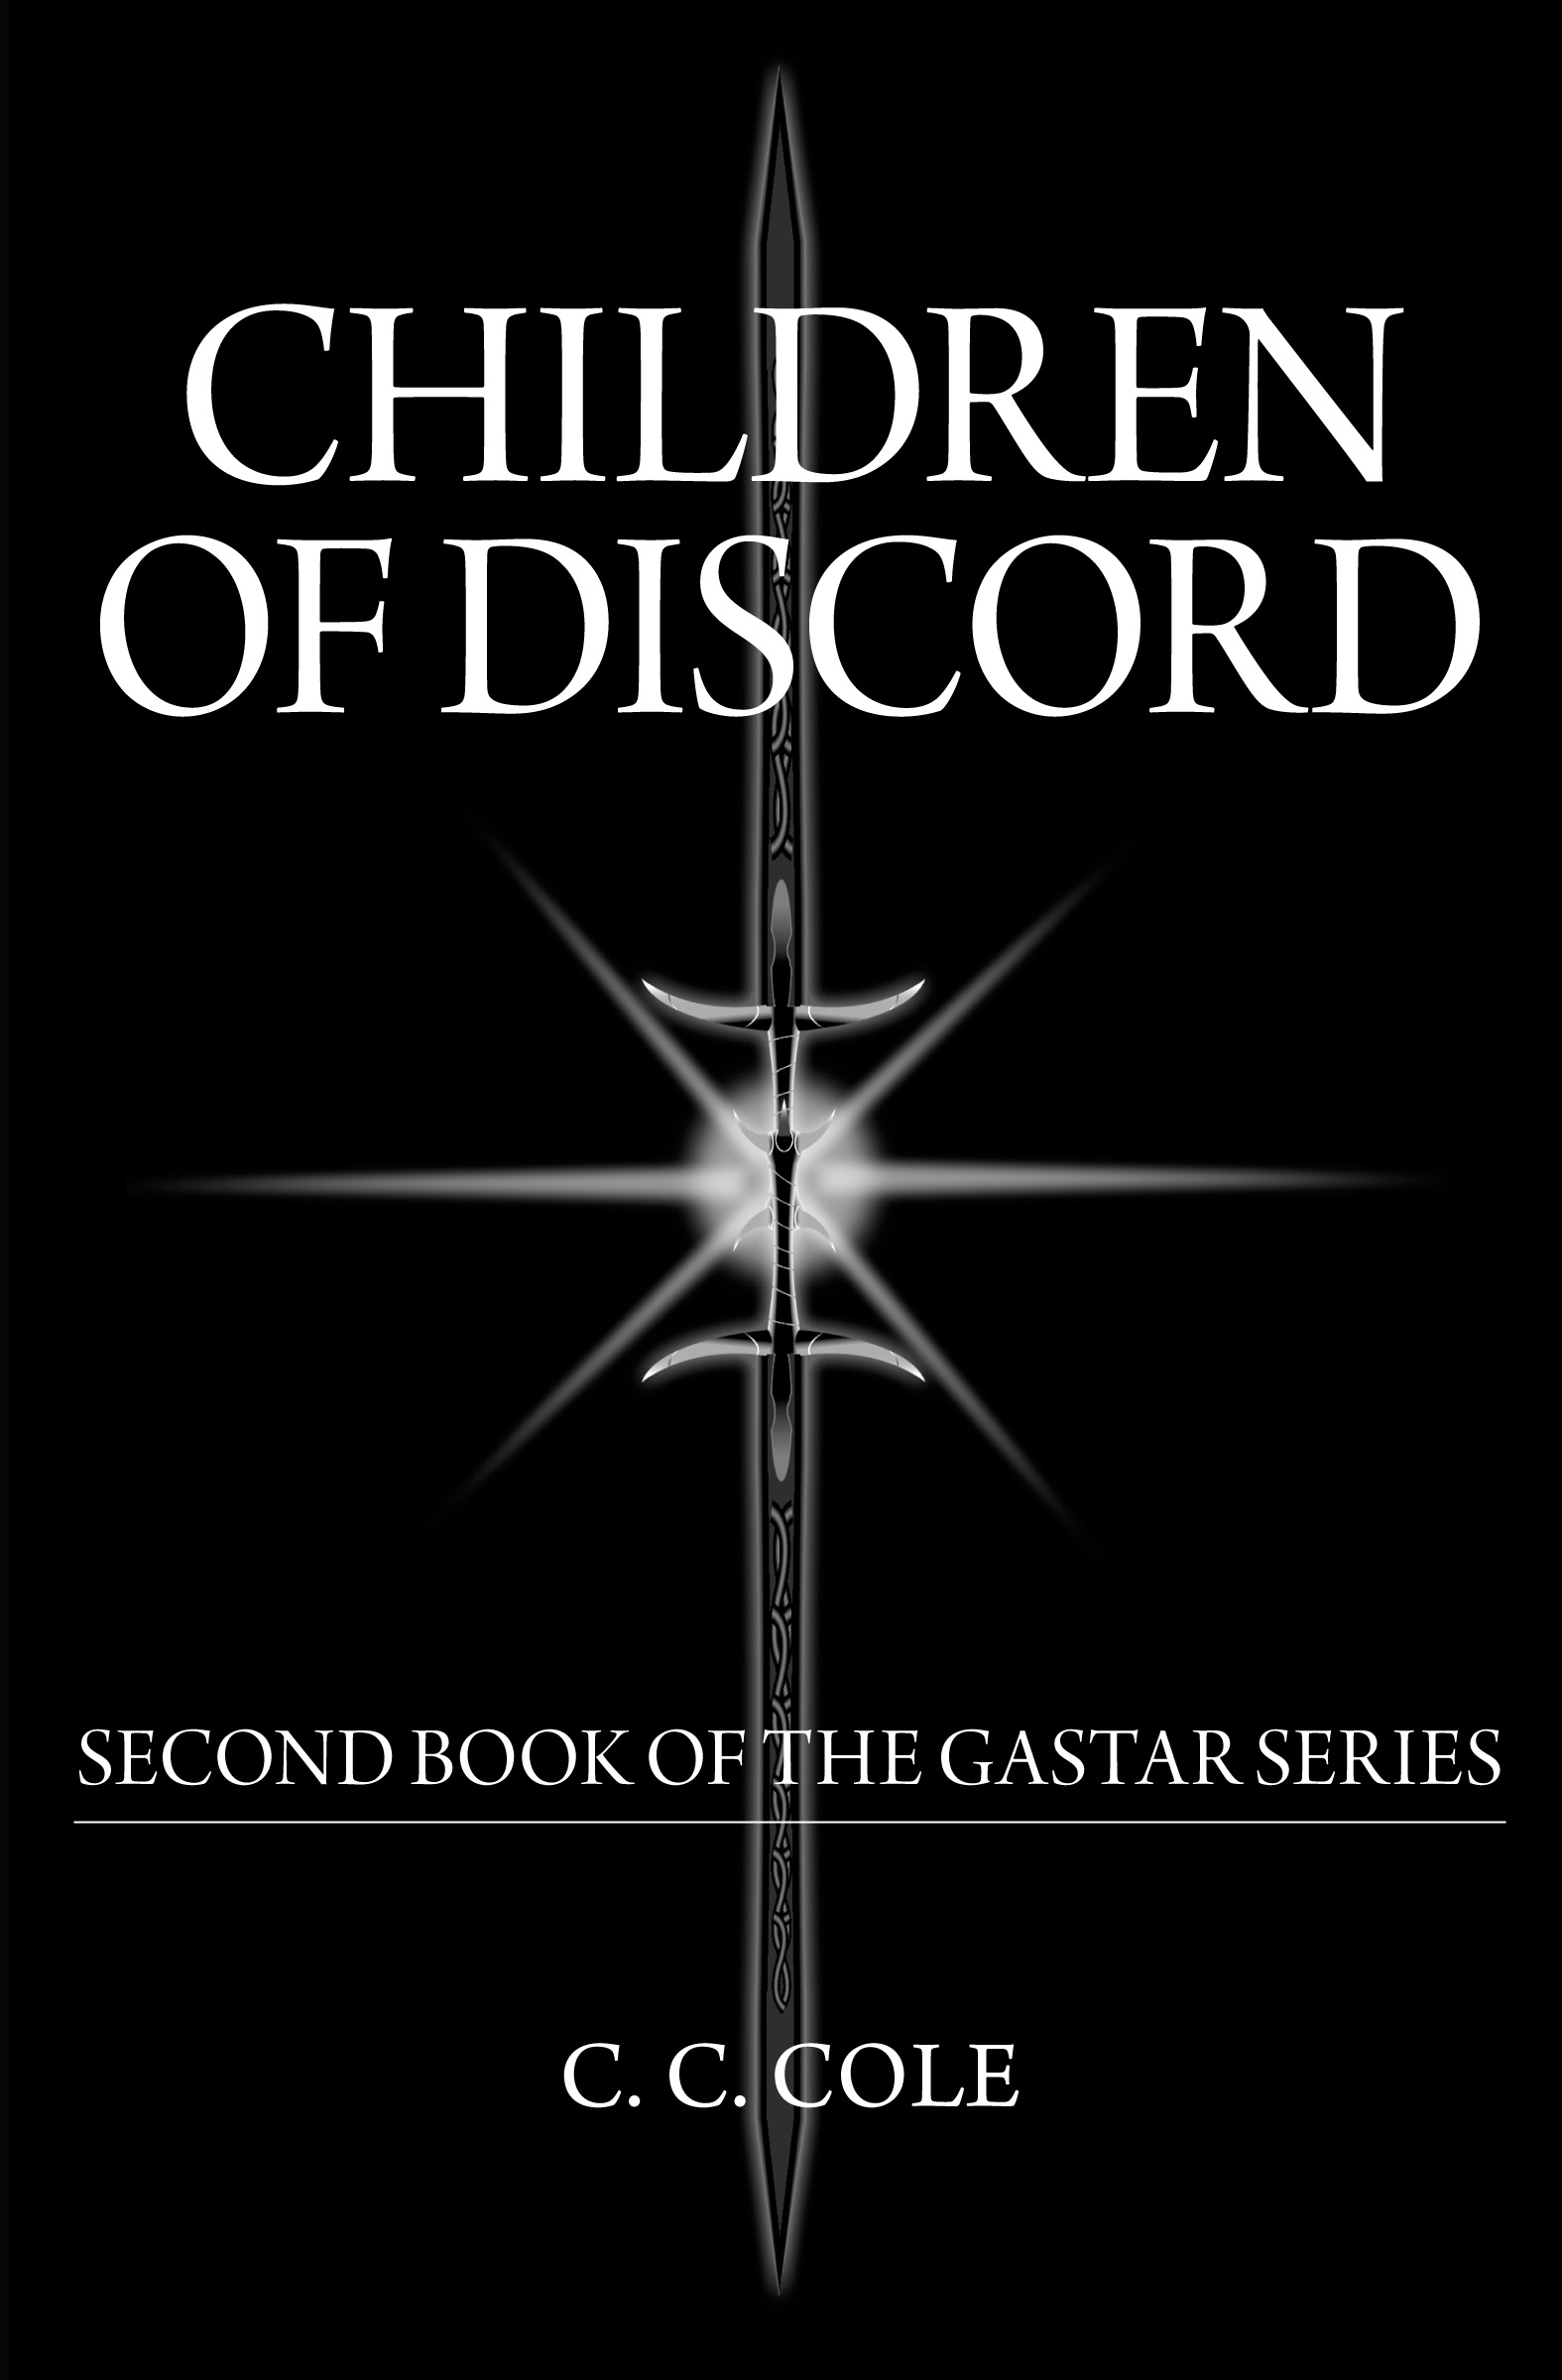 Second Book of the Gastar Series: Children of Discord